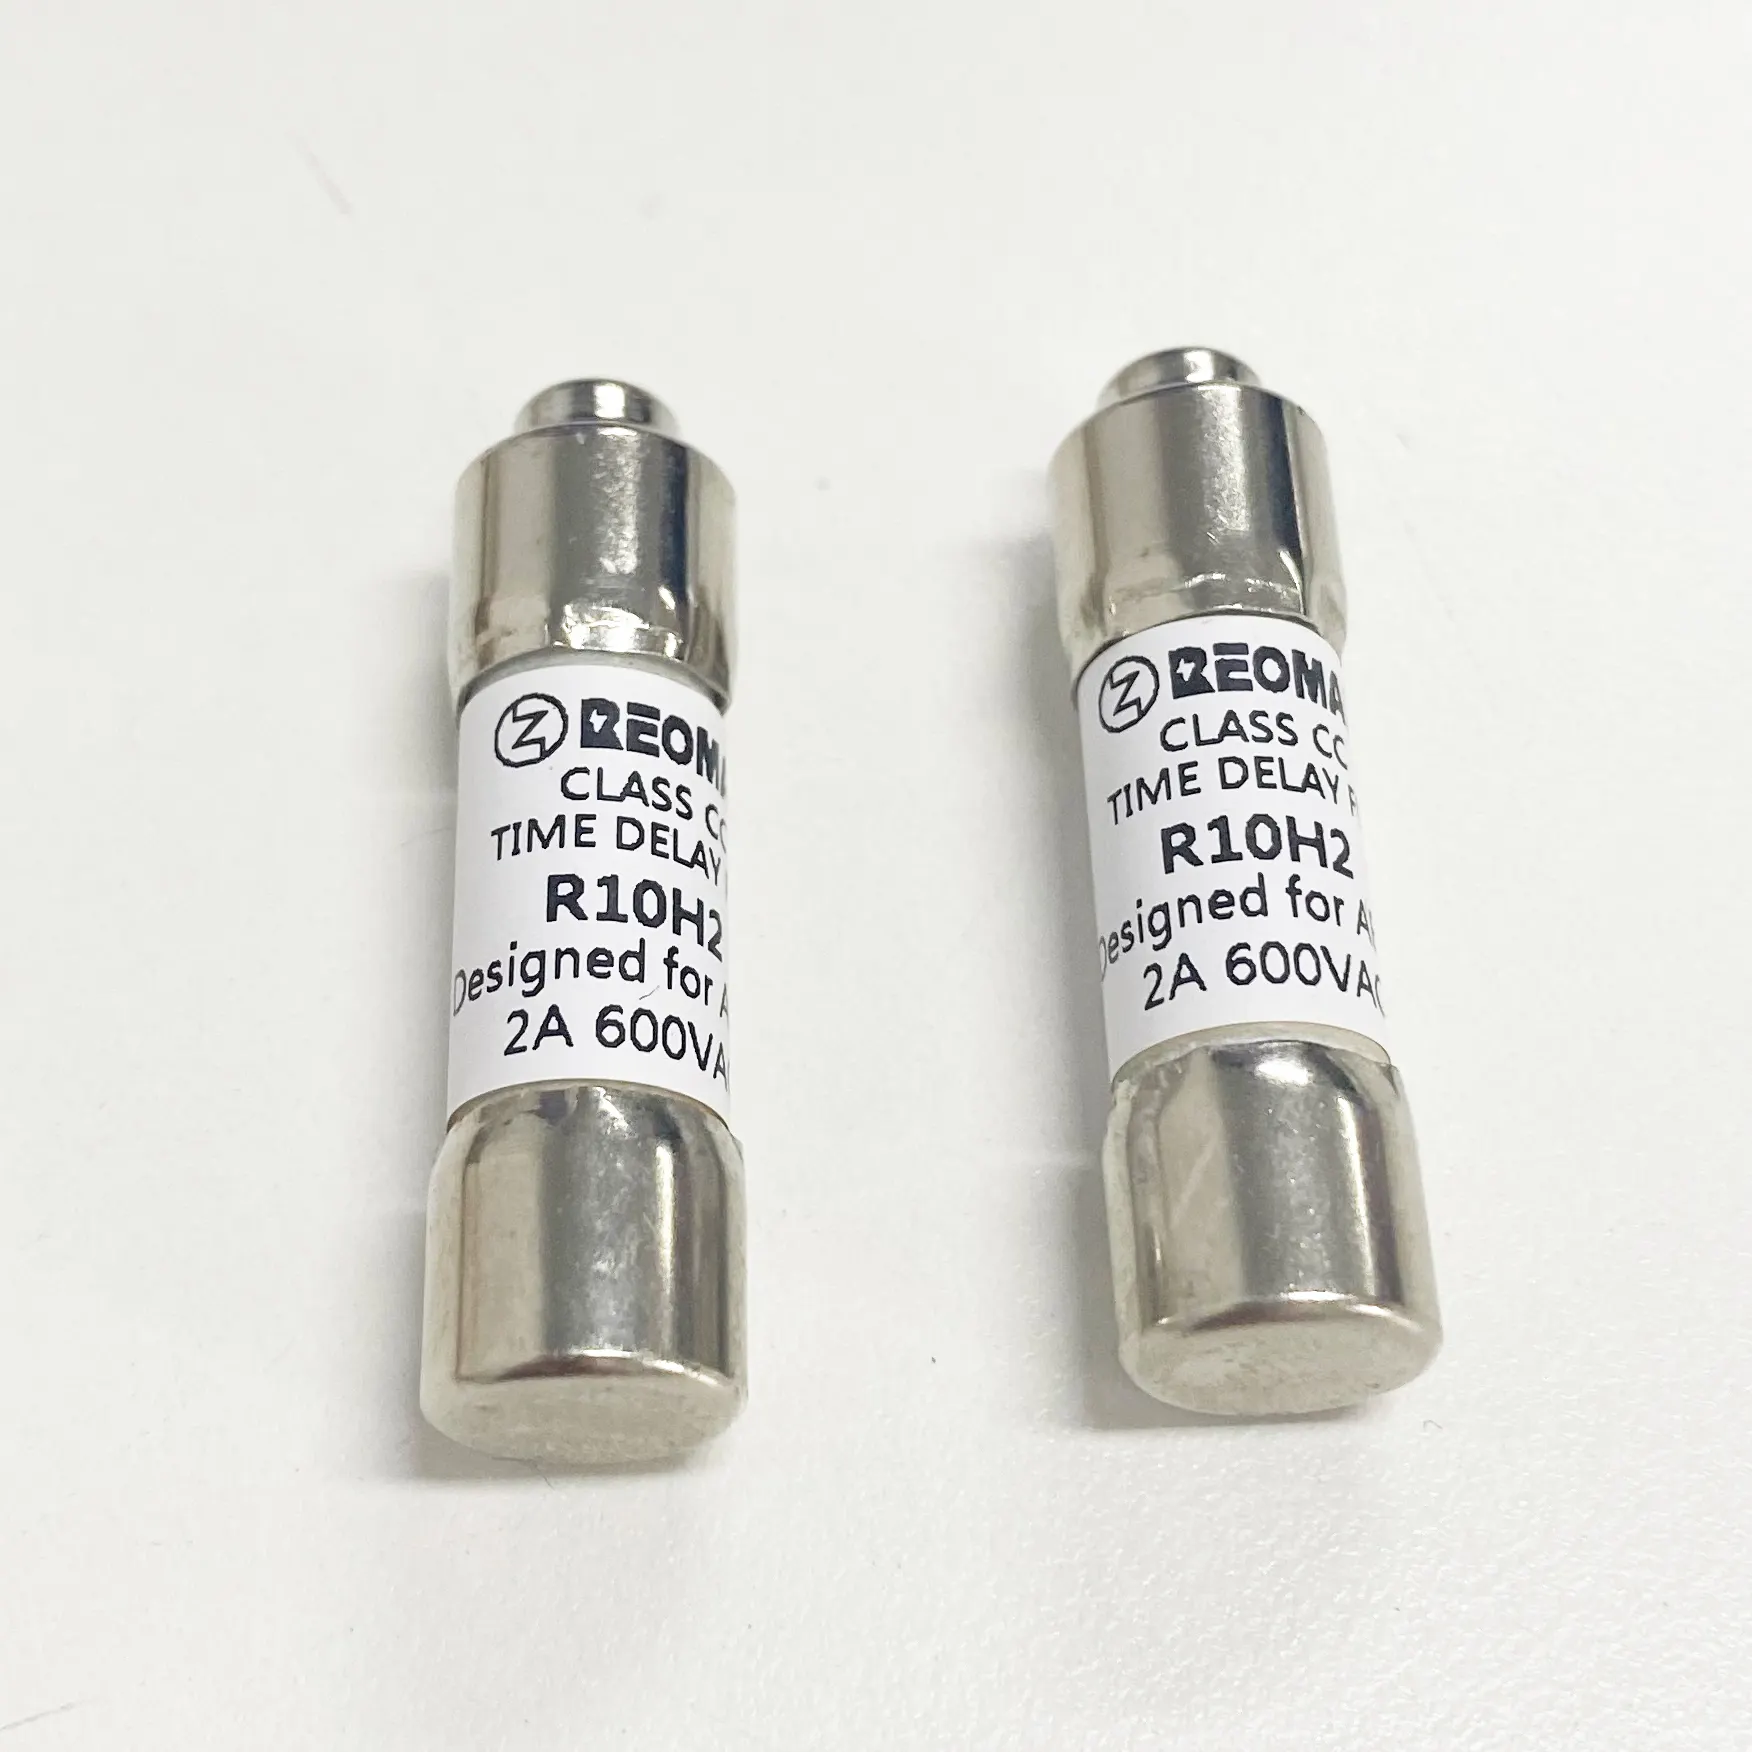 2A 600V Class CC time delay cylindrical midget fuses 10X38 fuse link same as fuse ATMR2